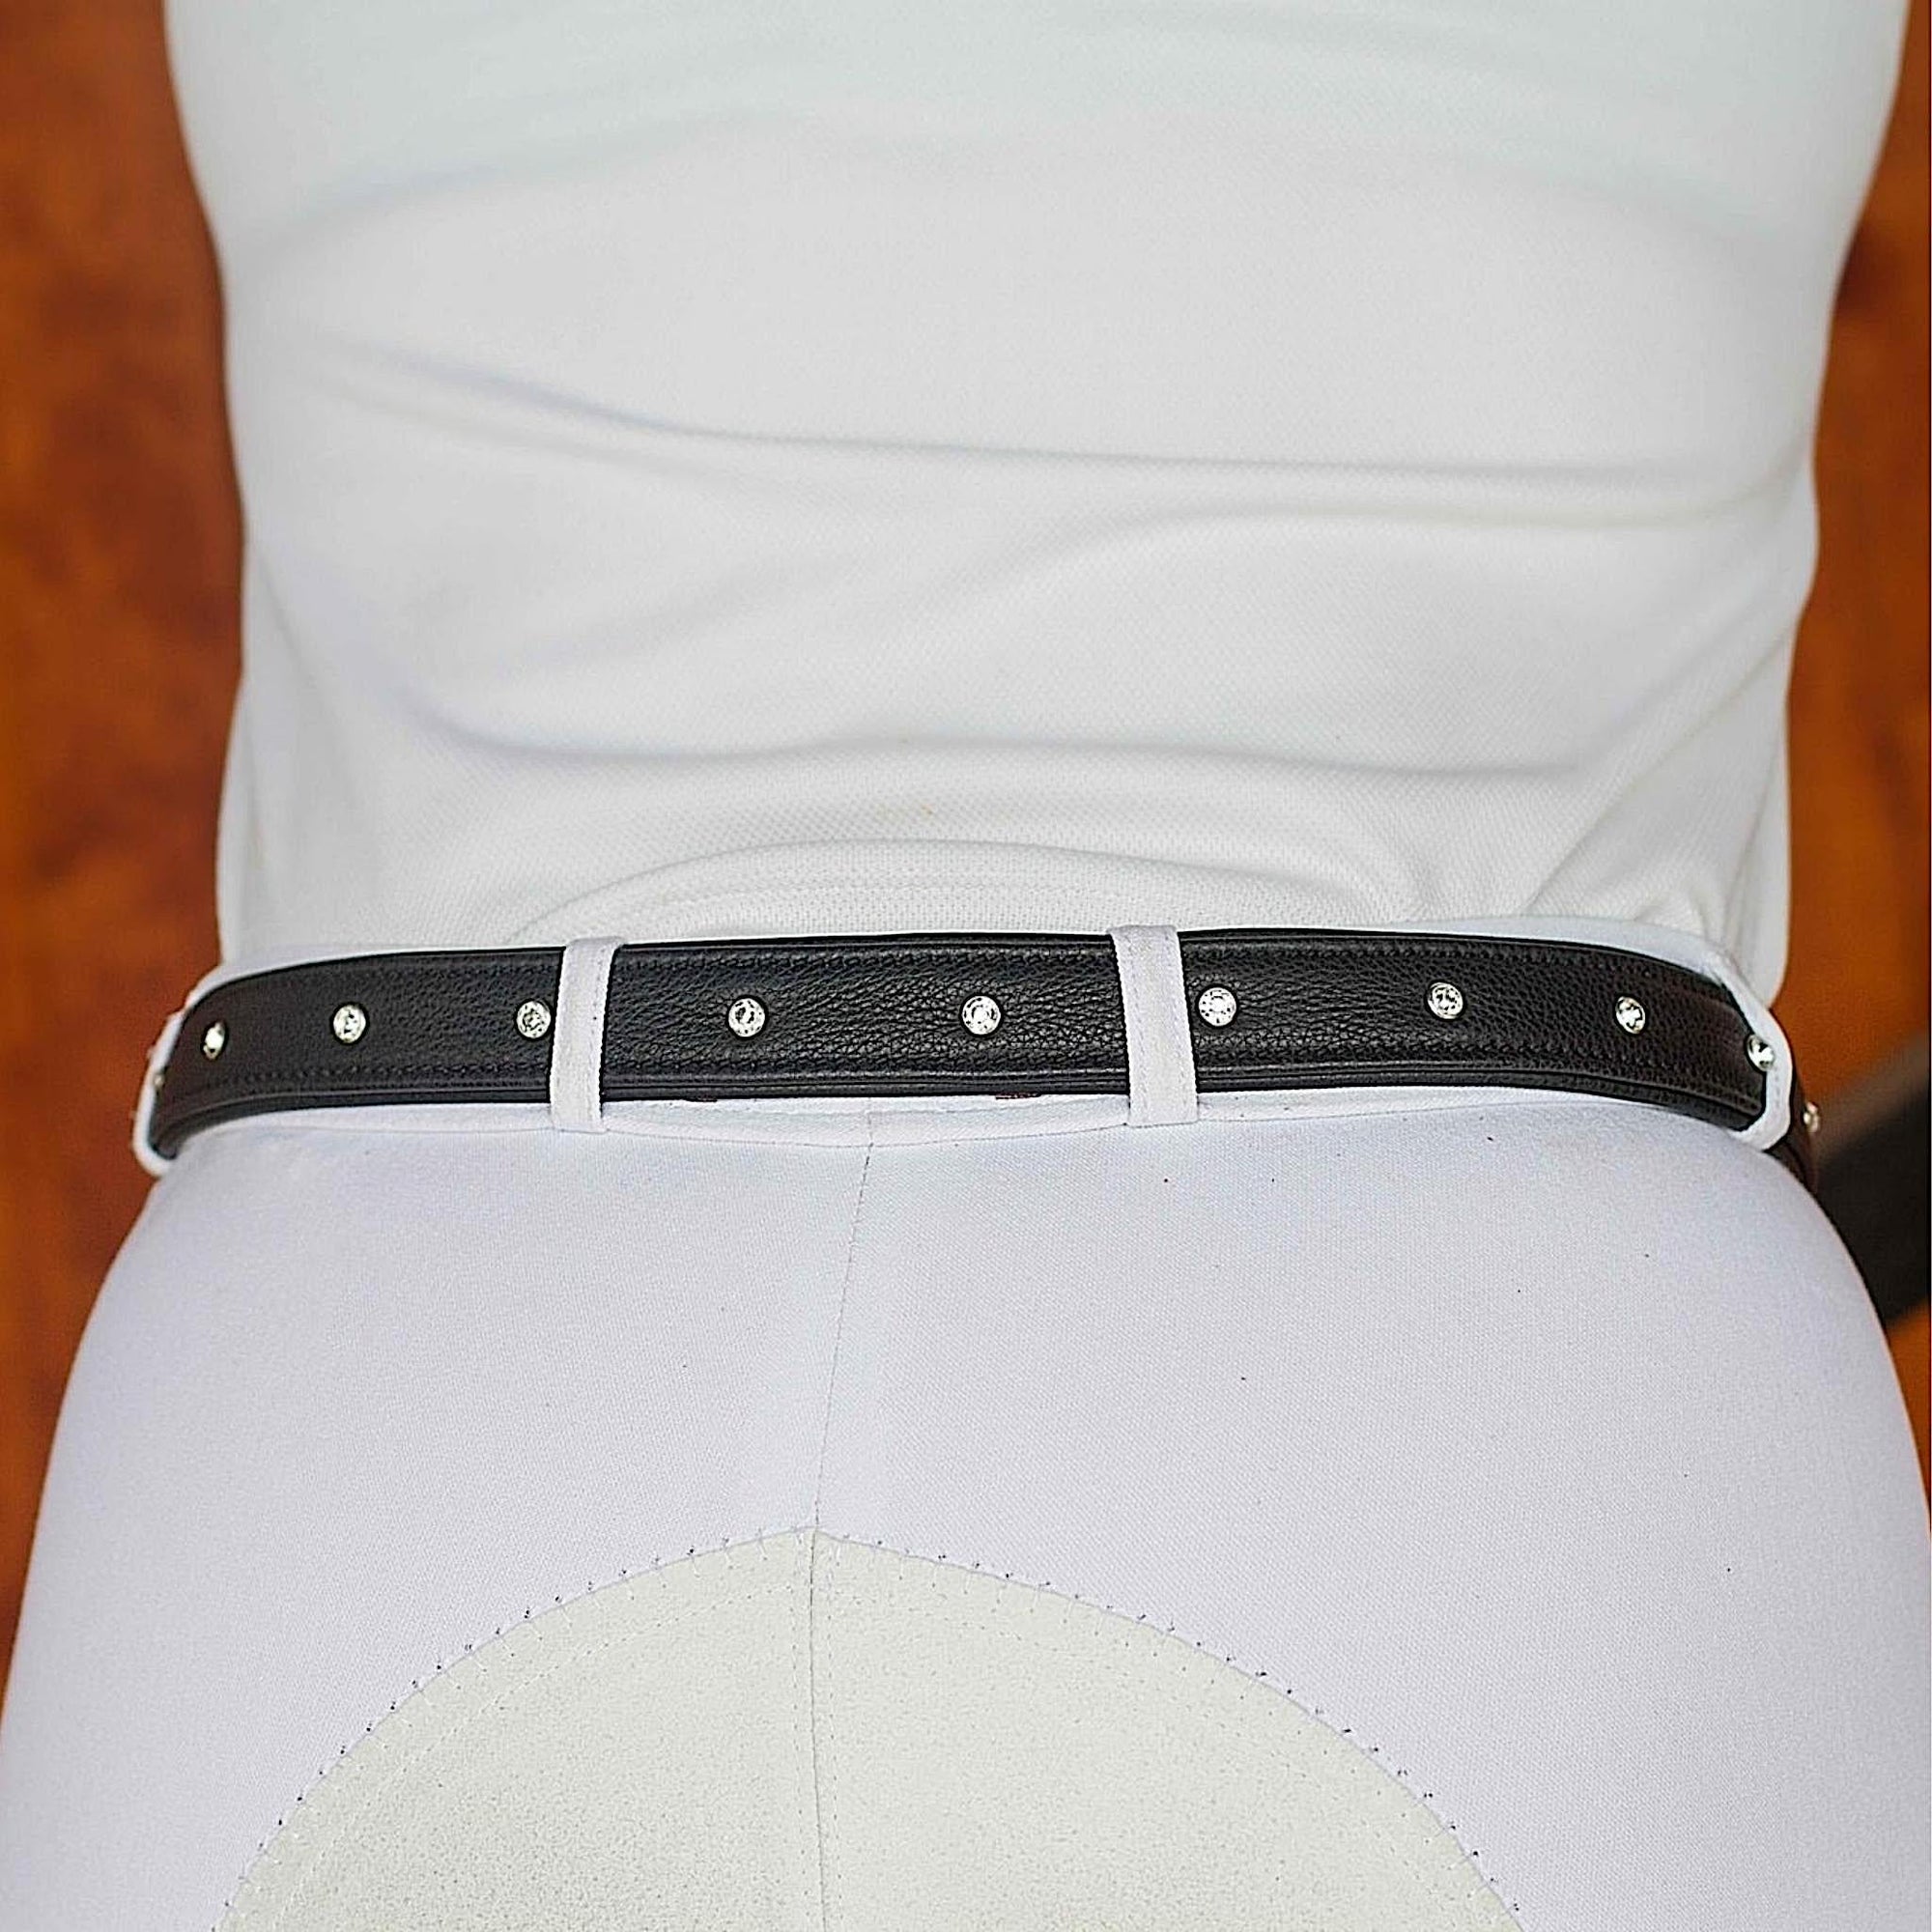 Black leather belt with an evenly distributed line of round crystals.